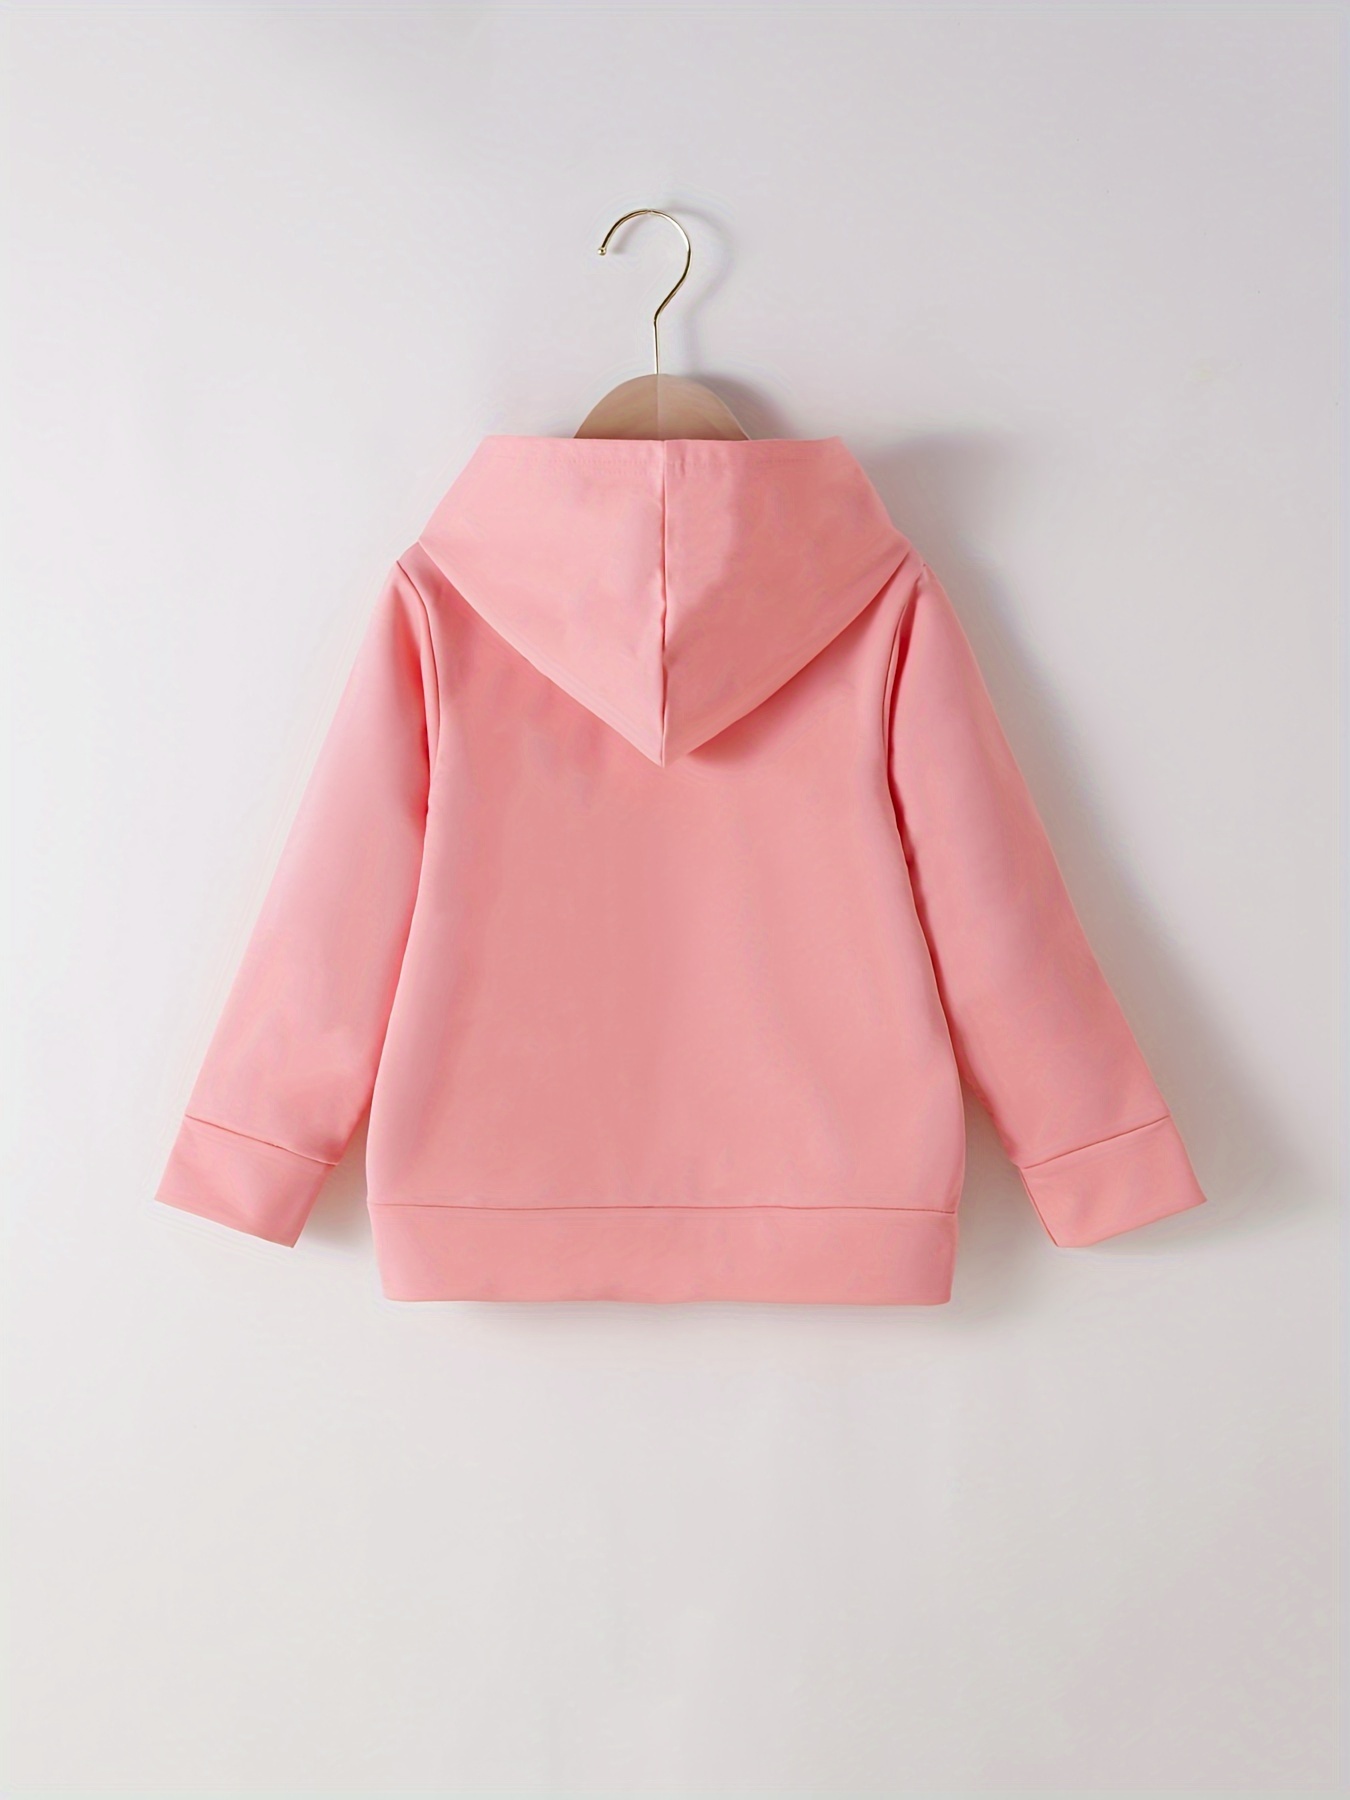 Oversized Hoodies for Teen Girls Trendy Hooded Loose Fit